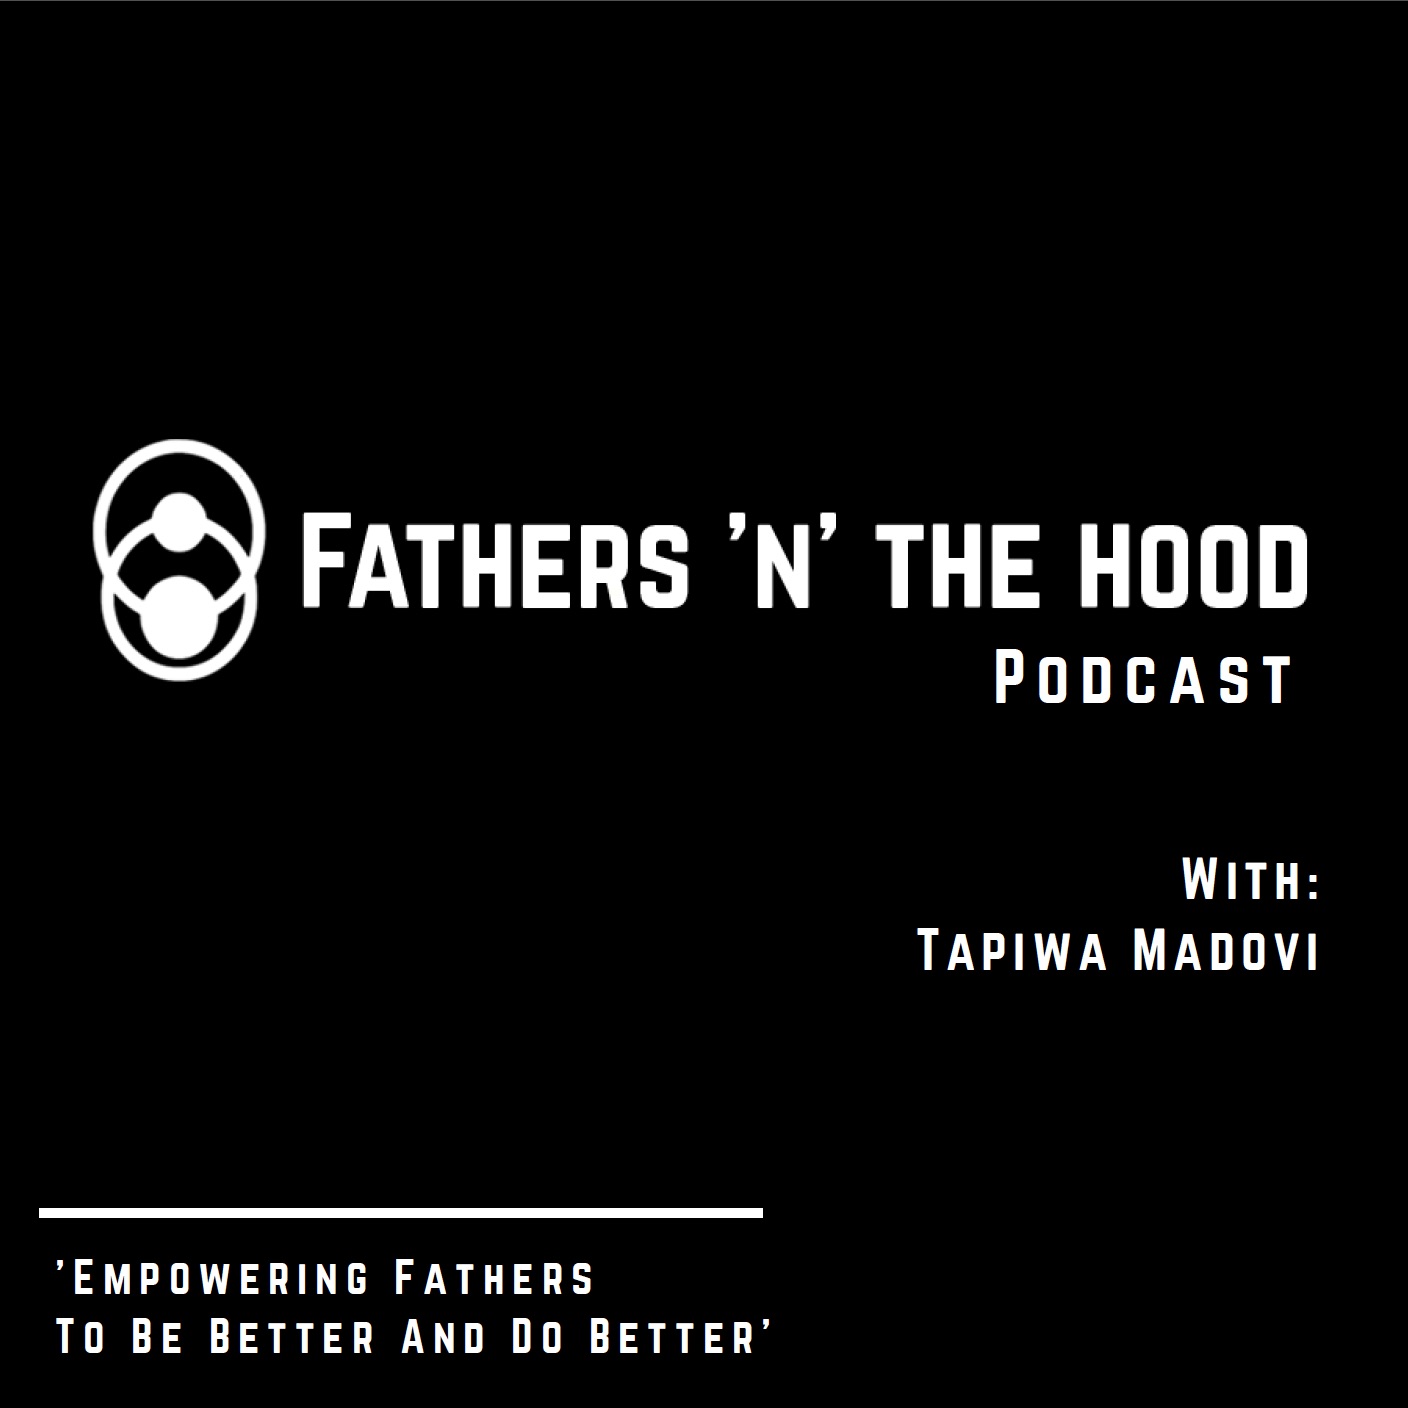 Fathers 'n' the Hood | Ep. 8 - "We Are Heroes" with Pastor G